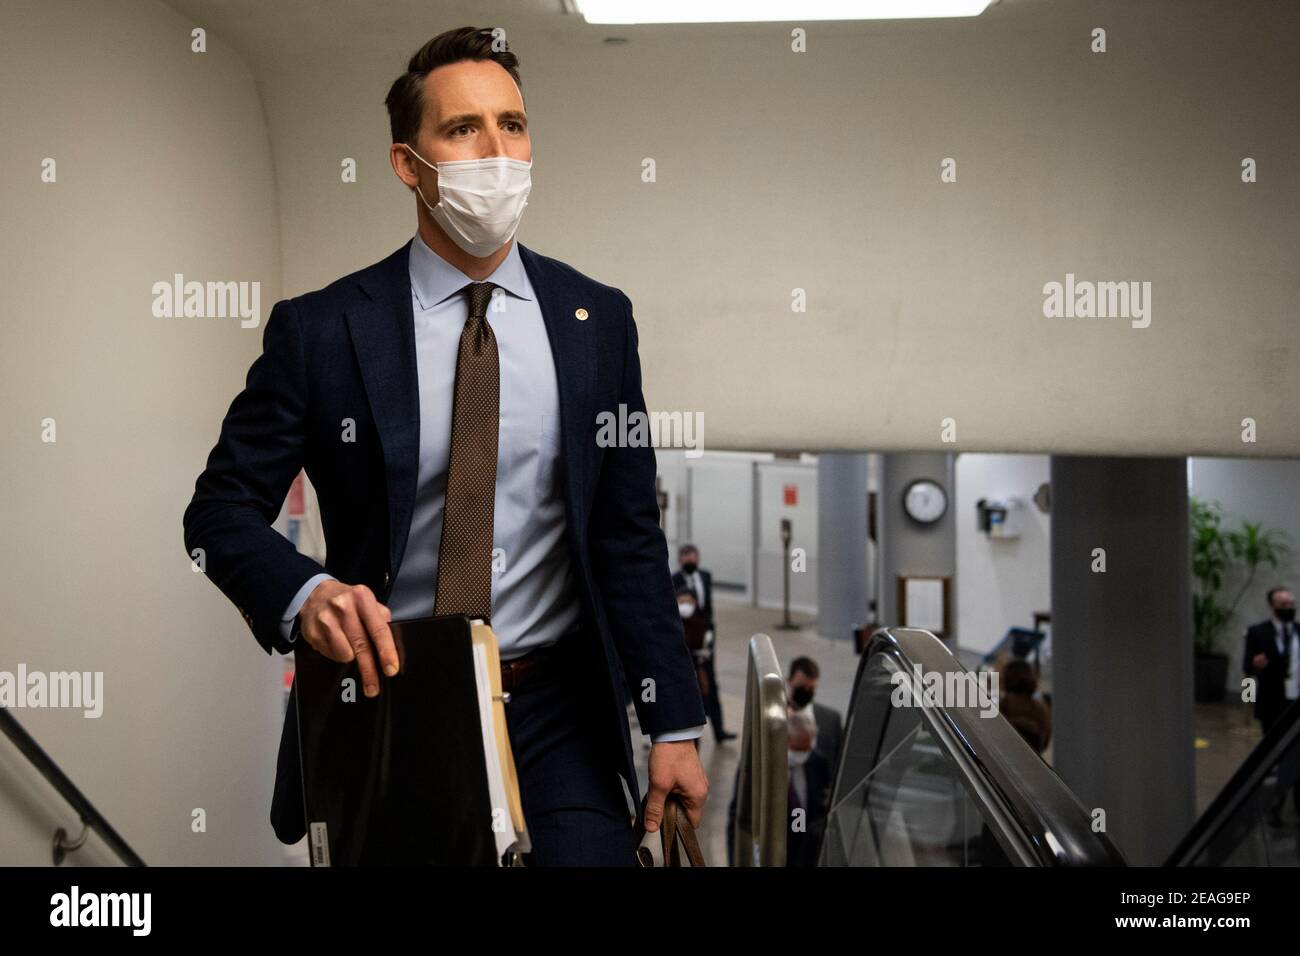 United States. 9th Feb, 2021. Sen. Josh Hawley, R-Mo., walks through the Senate subway on the first day of former President Donald Trump's second impeachment trial at the U.S. Capitol in Washington on Tuesday, Feb. 9, 2021. Trump is charged with “incitement of insurrection” after his supporters stormed the Capitol in an attempt to overturn November's election result. Credit: Caroline Brehman/Pool Via Cnp/Media Punch/Alamy Live News Stock Photo